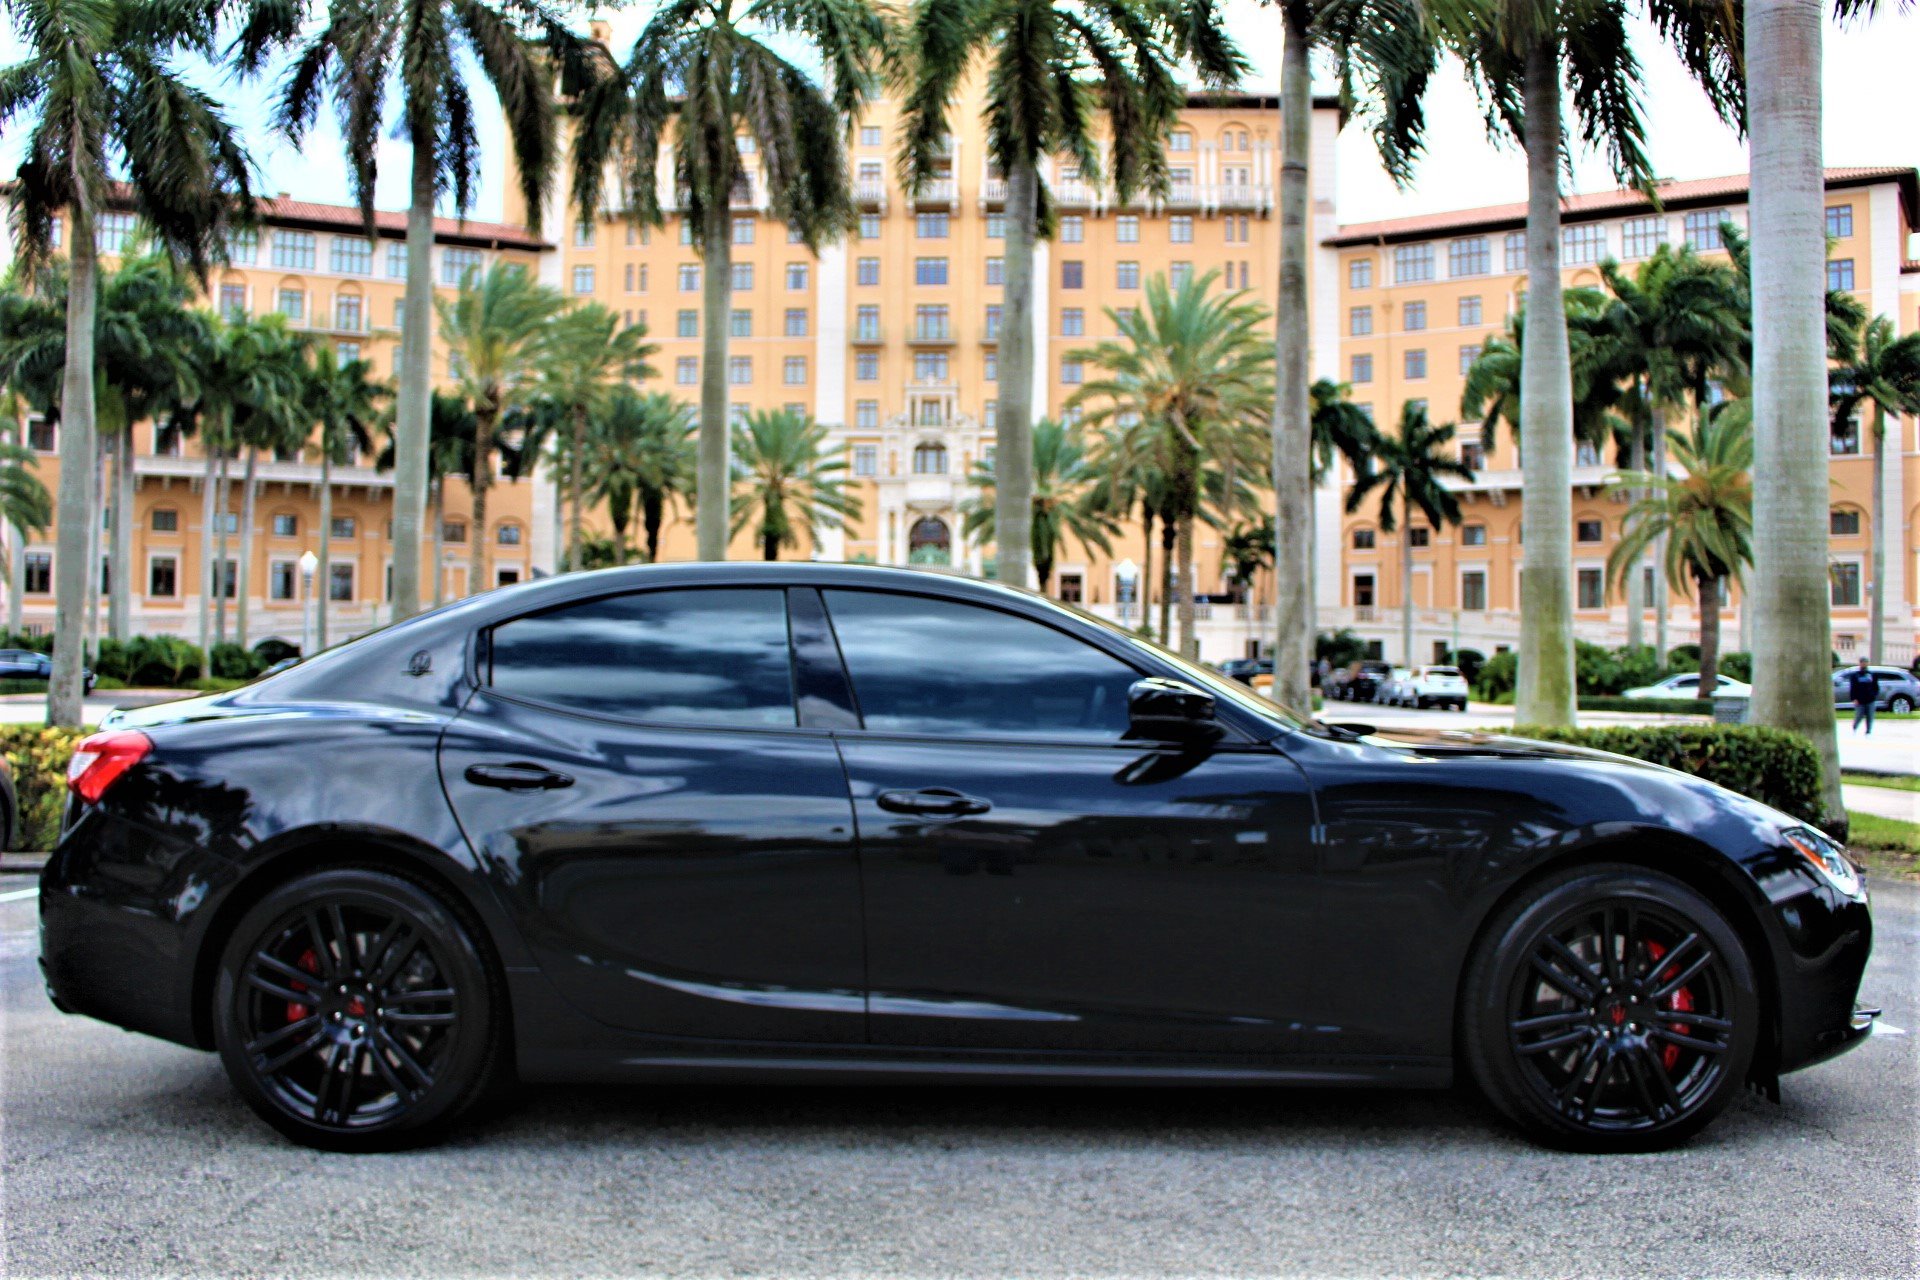 Used 2017 Maserati Ghibli S S for sale Sold at The Gables Sports Cars in Miami FL 33146 4